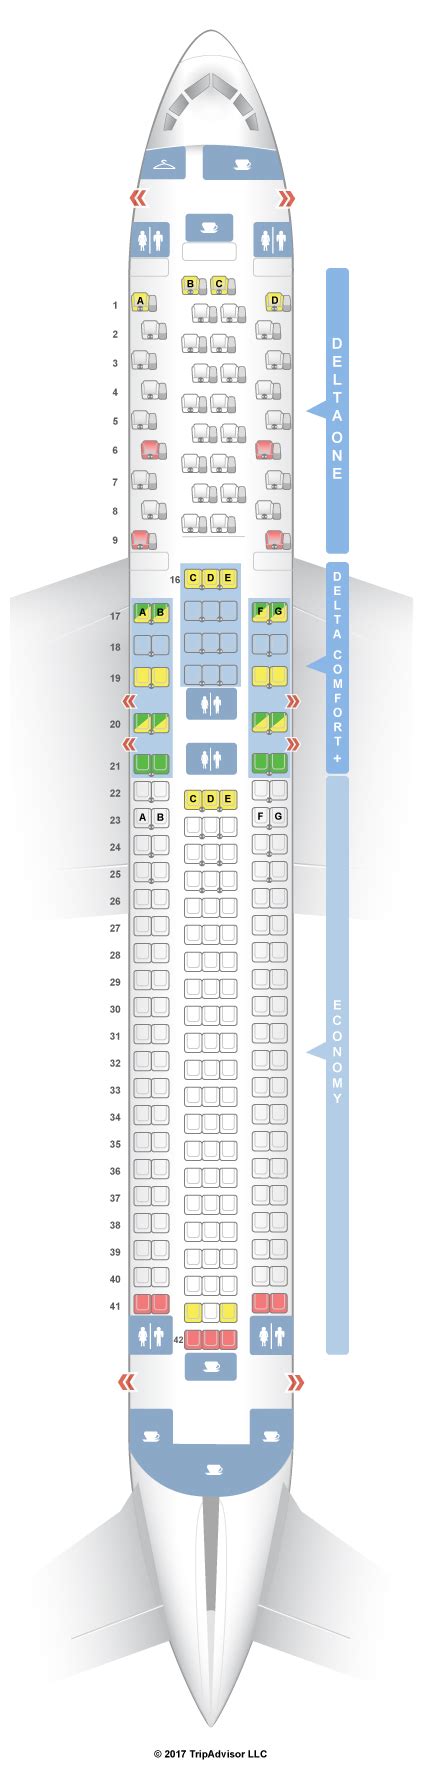 For your next Delta flight, use this seating chart to get the most comfortable seats, legroom, ... Boeing 757-300 (75Y) Boeing 767-300ER (76H/76Z) Layout 3; Boeing 767-300ER (76L) Layout 2; ... my wife in F. Hers was a bit better due to leg room in front. 19 A was truly a mess and much worse than described on SeatGuru. The curvature of the .... 